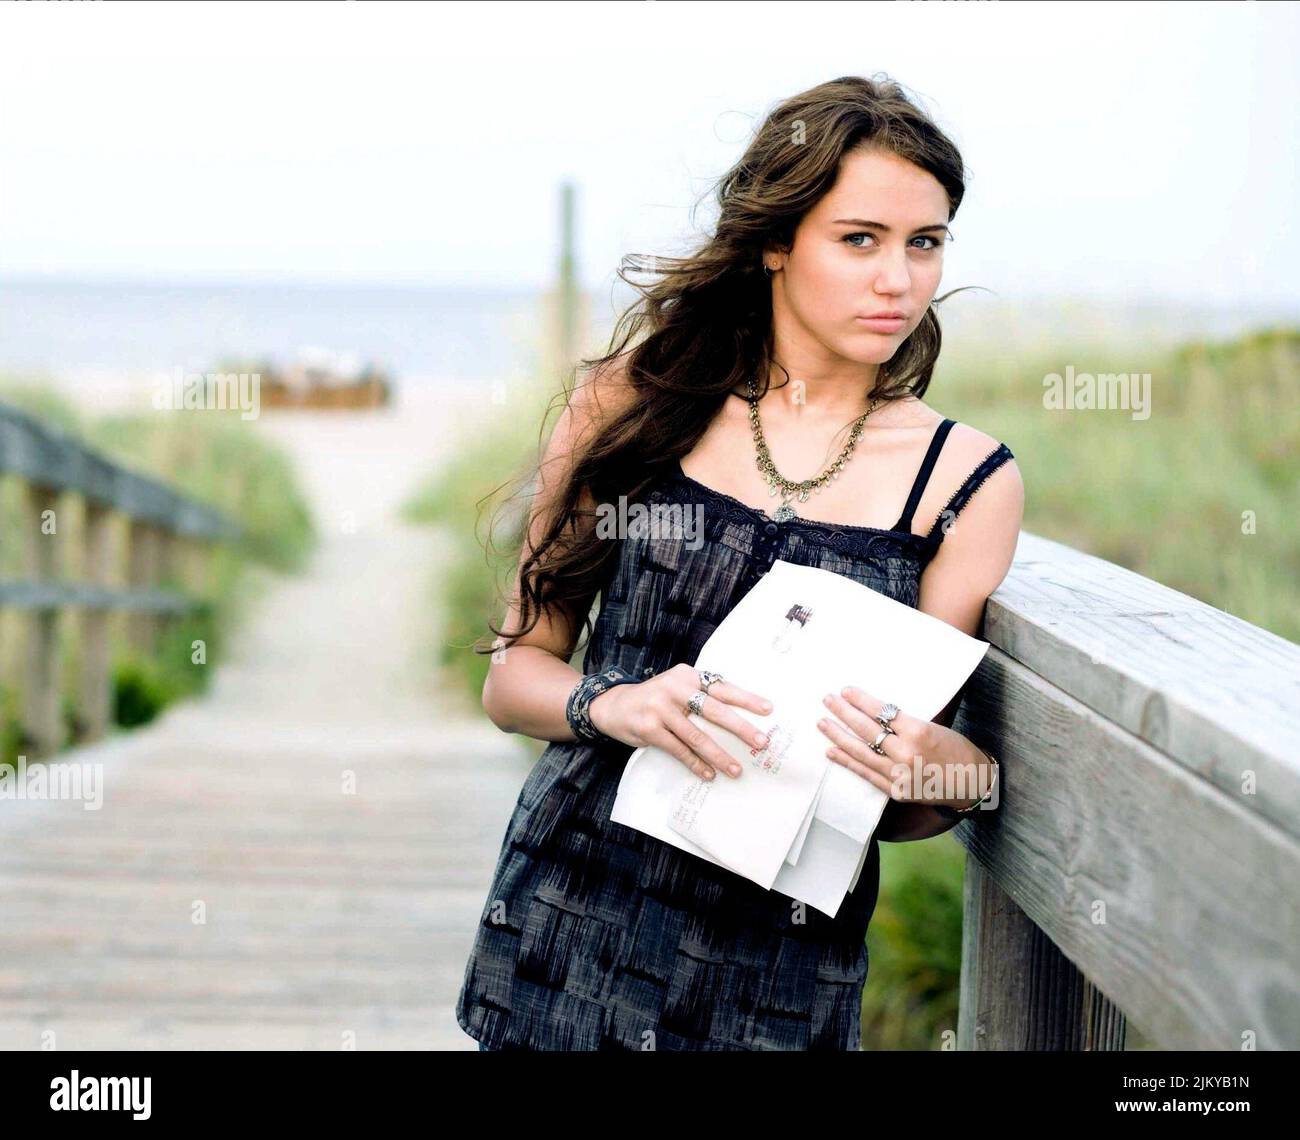 MILEY CYRUS, THE LAST SONG, 2010 Stock Photo